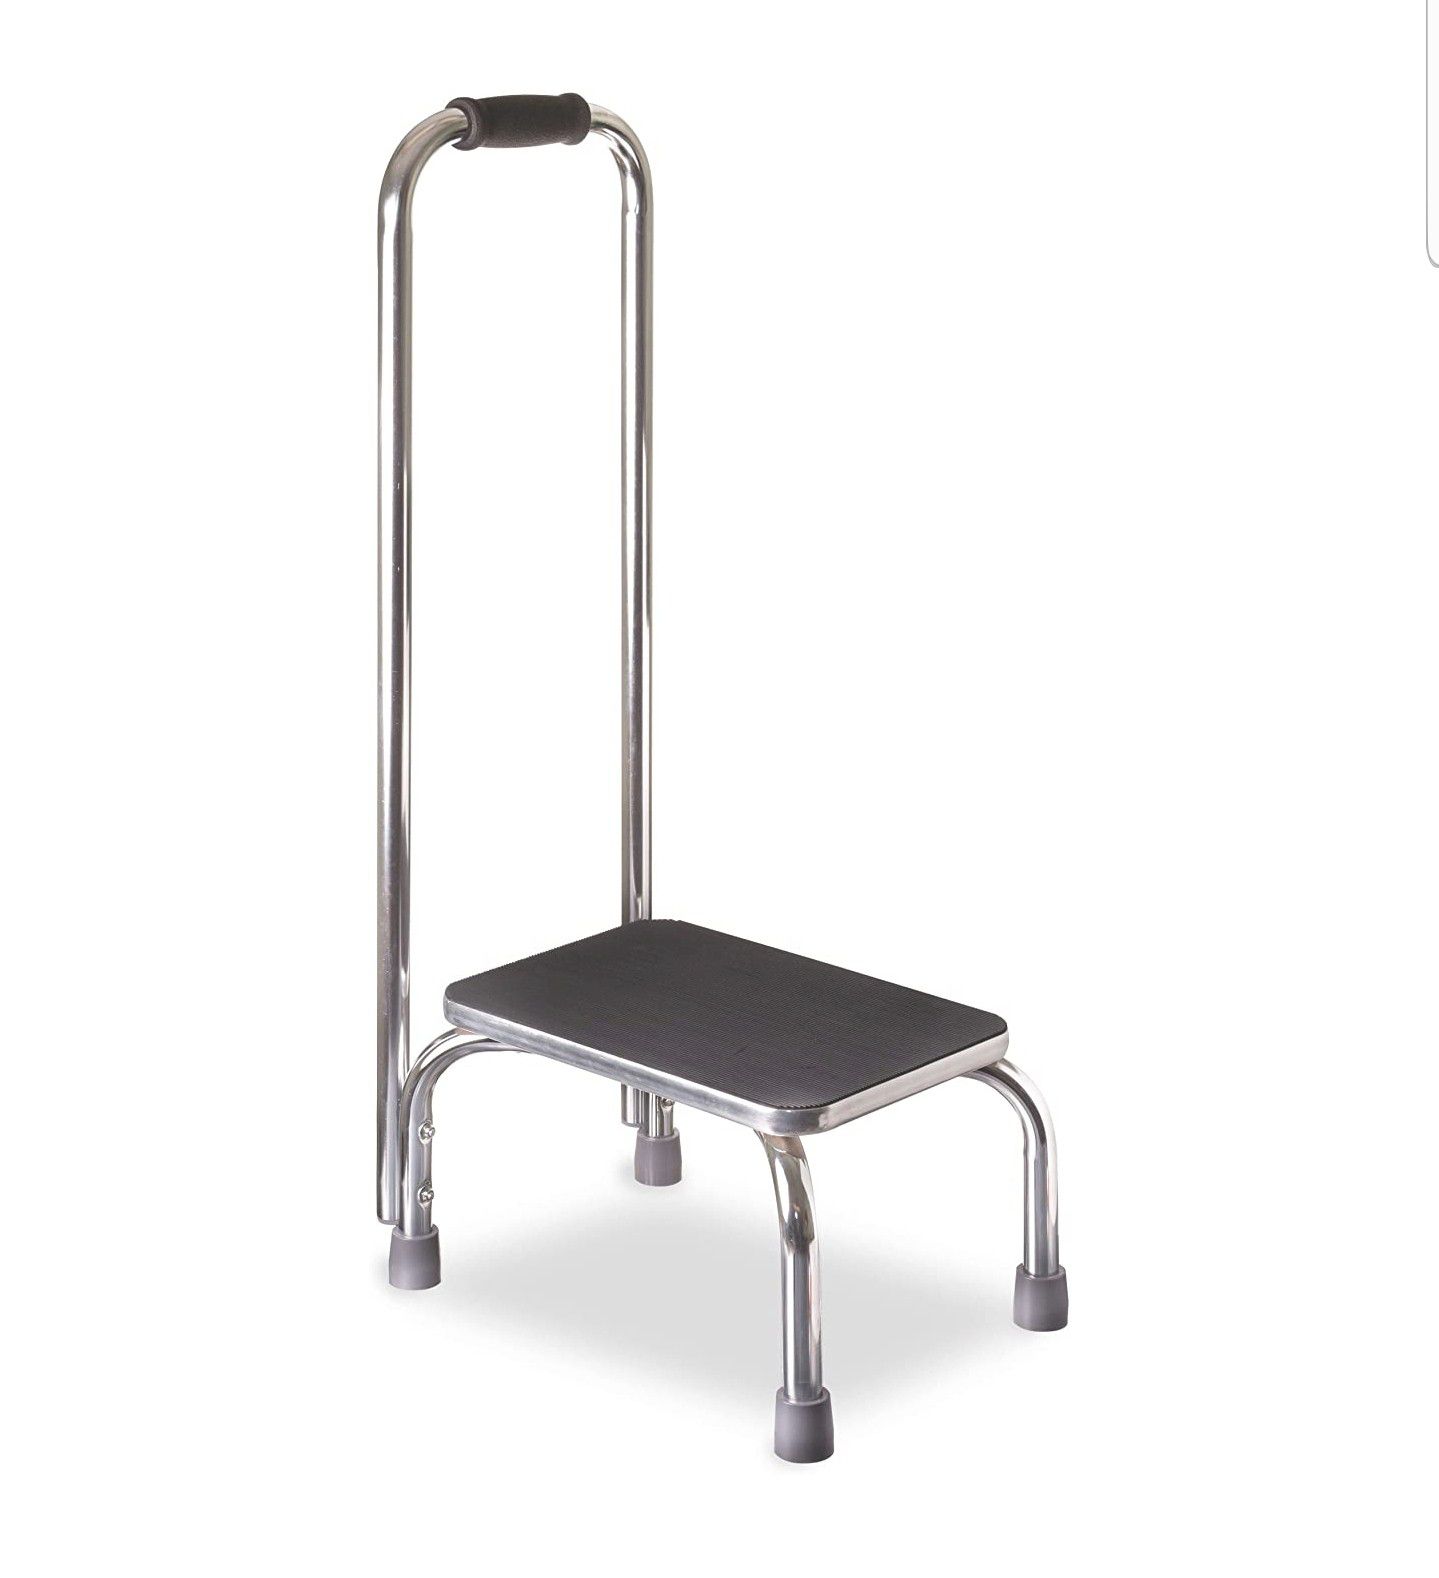 DMI Step Stool with Handle for Adults and Seniors Made of Heavy Duty Metal, Holds up to 300 Pounds with 9.5 Inch Step Up